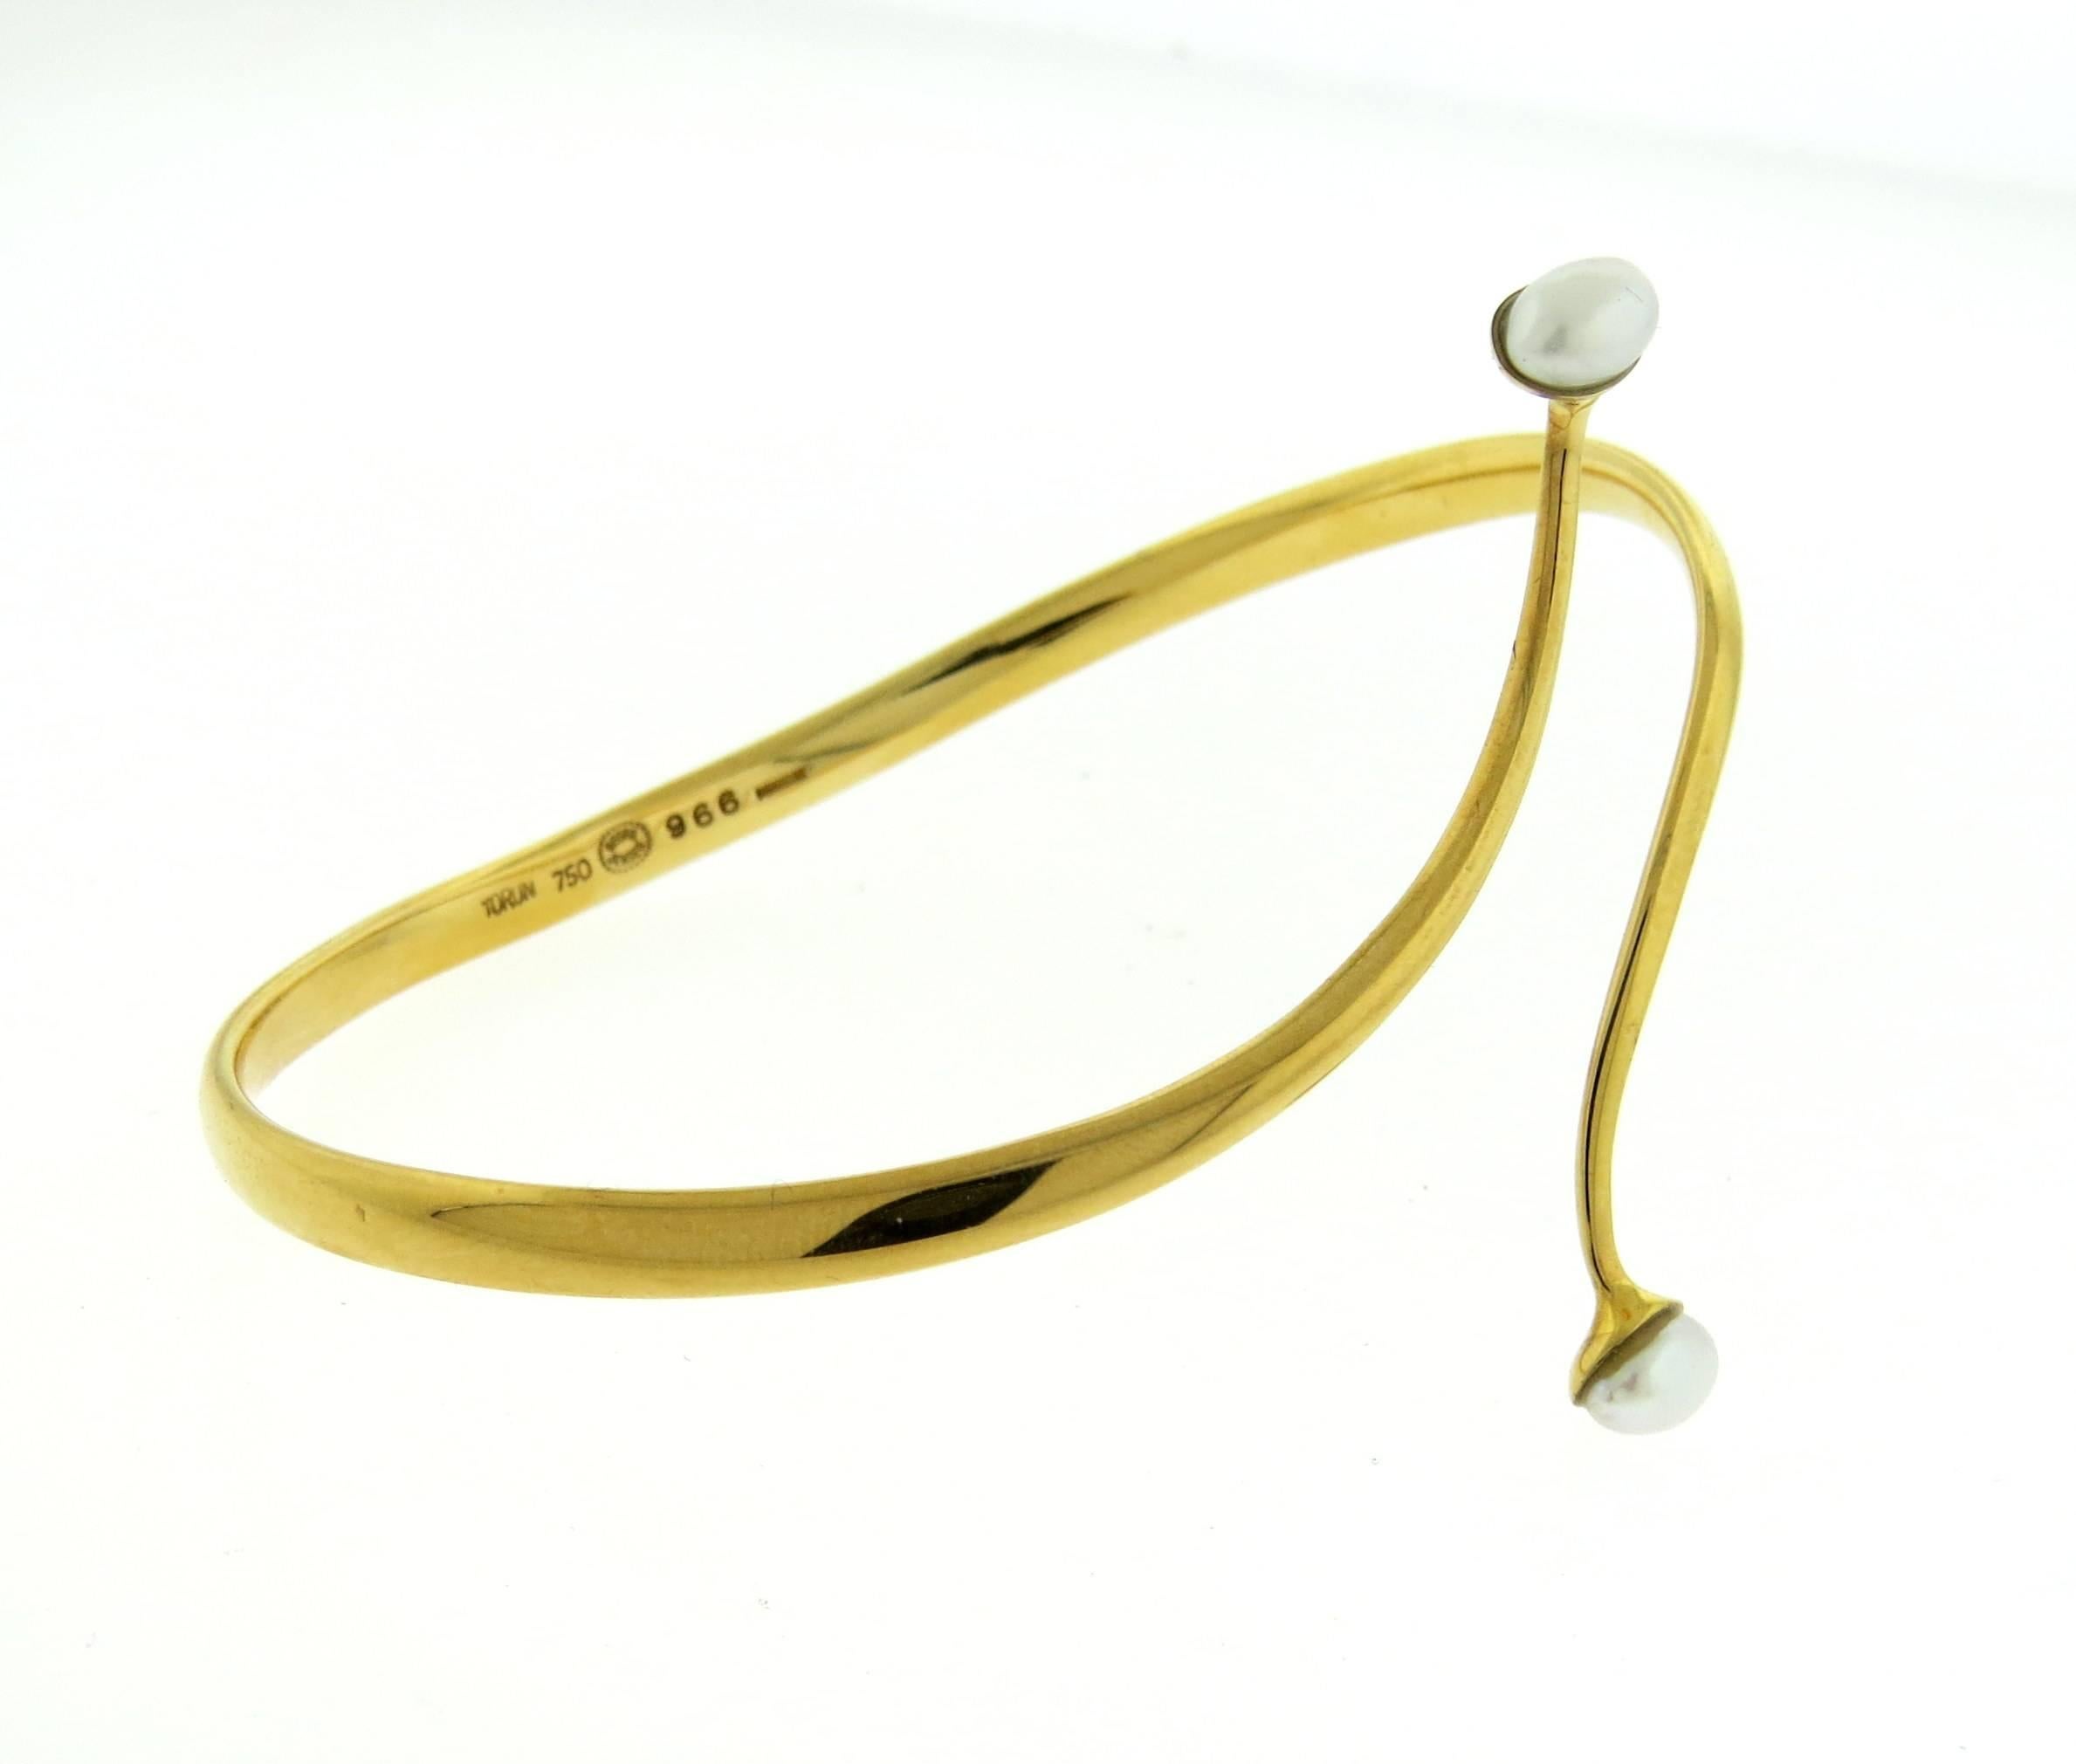 An 18k yellow gold bracelet set with pearls.  The bracelet will comfortably fit up to 7" - 7 1/2"  wrist and is 50mm wide  at center point.  The weight of the piece is 21 grams. Marked: Georg Jensen, 750, Denmark, 966 , Torun.  Comes with